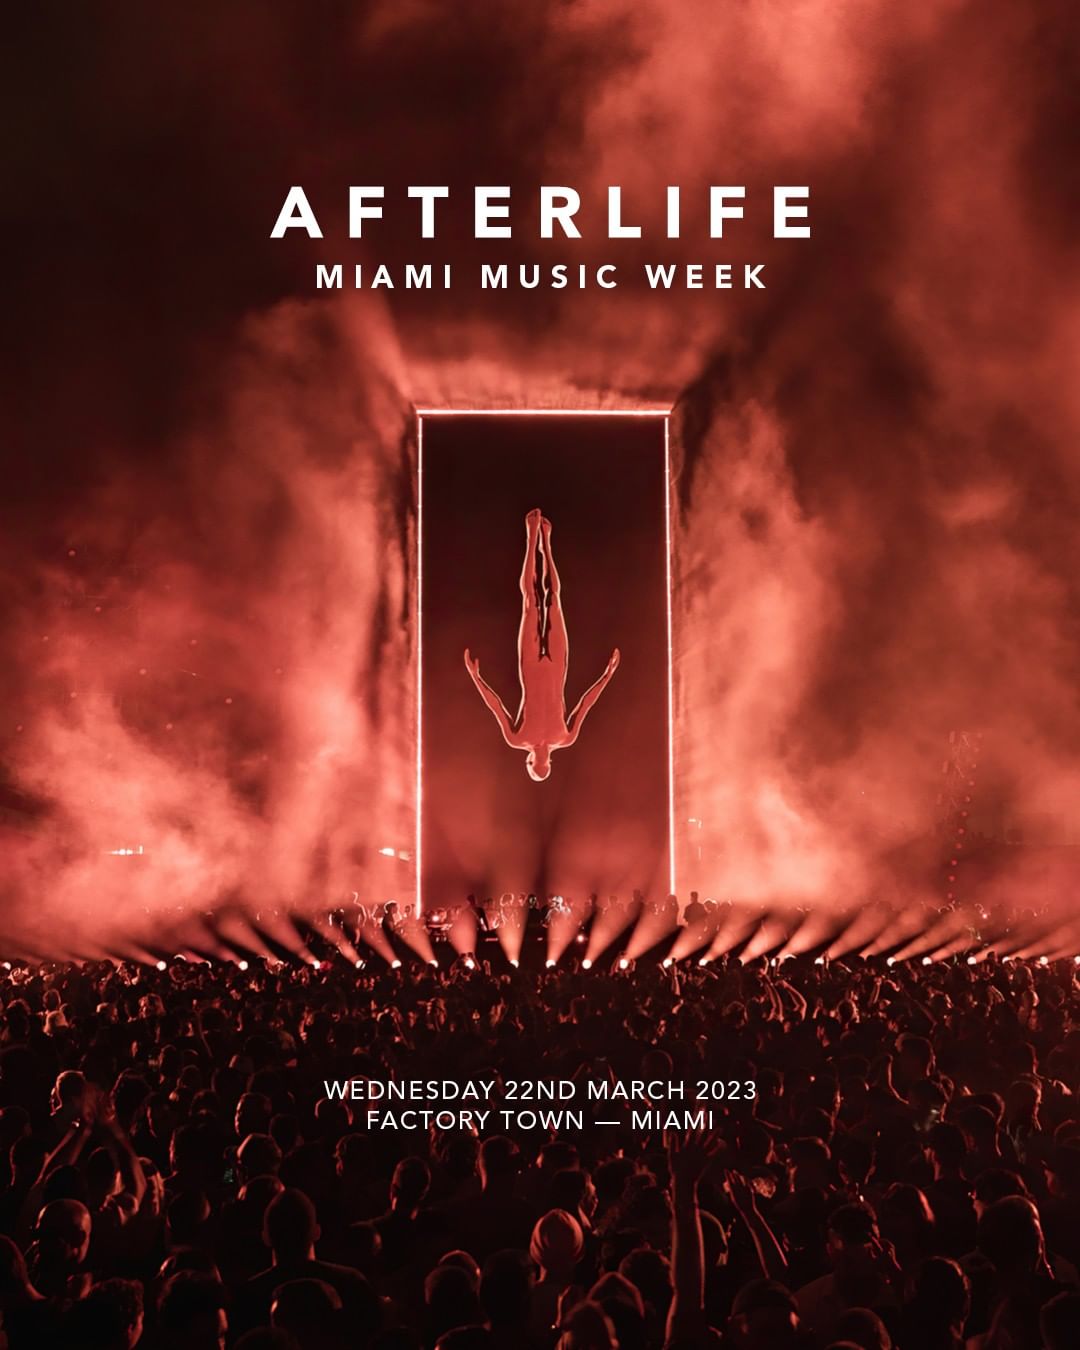 Tale Of Us' Afterlife Returns to Miami for Music Week 2023